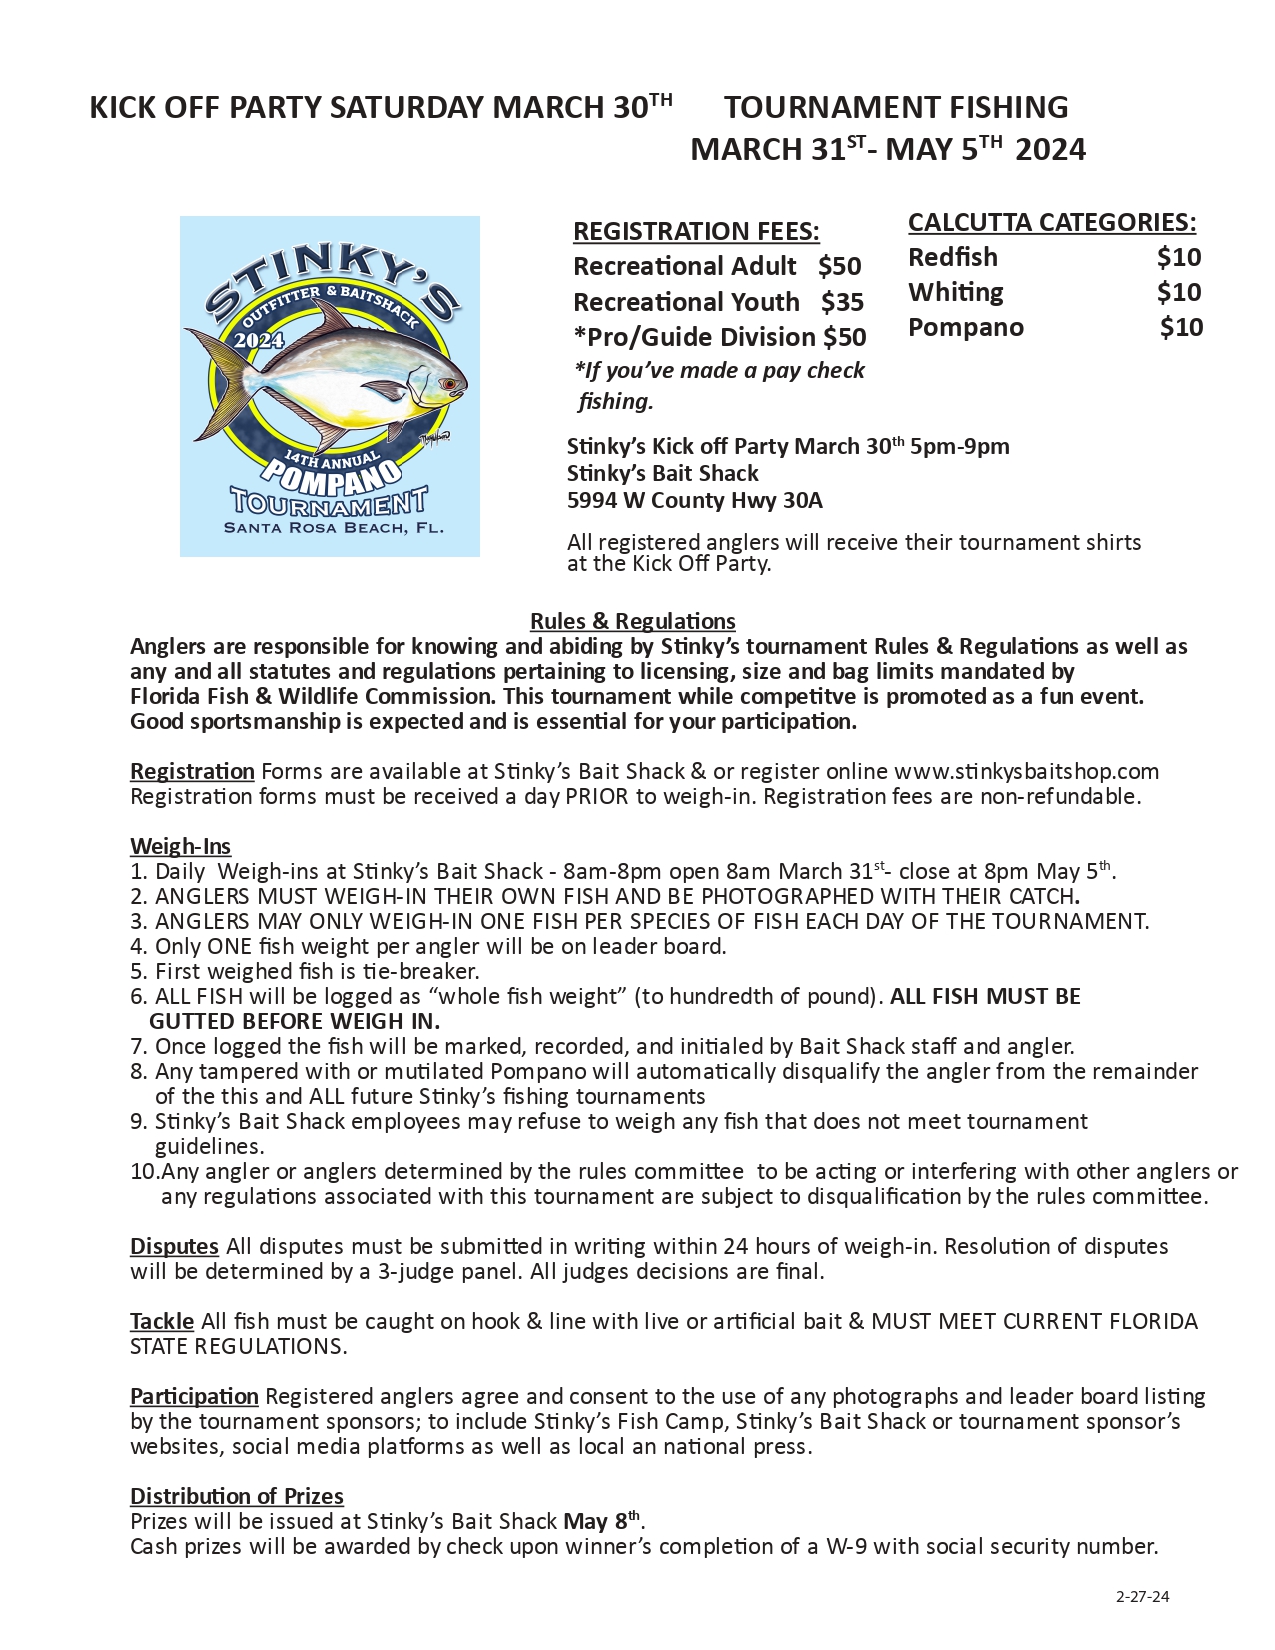 Popmano's tournament fishing regulations and rules